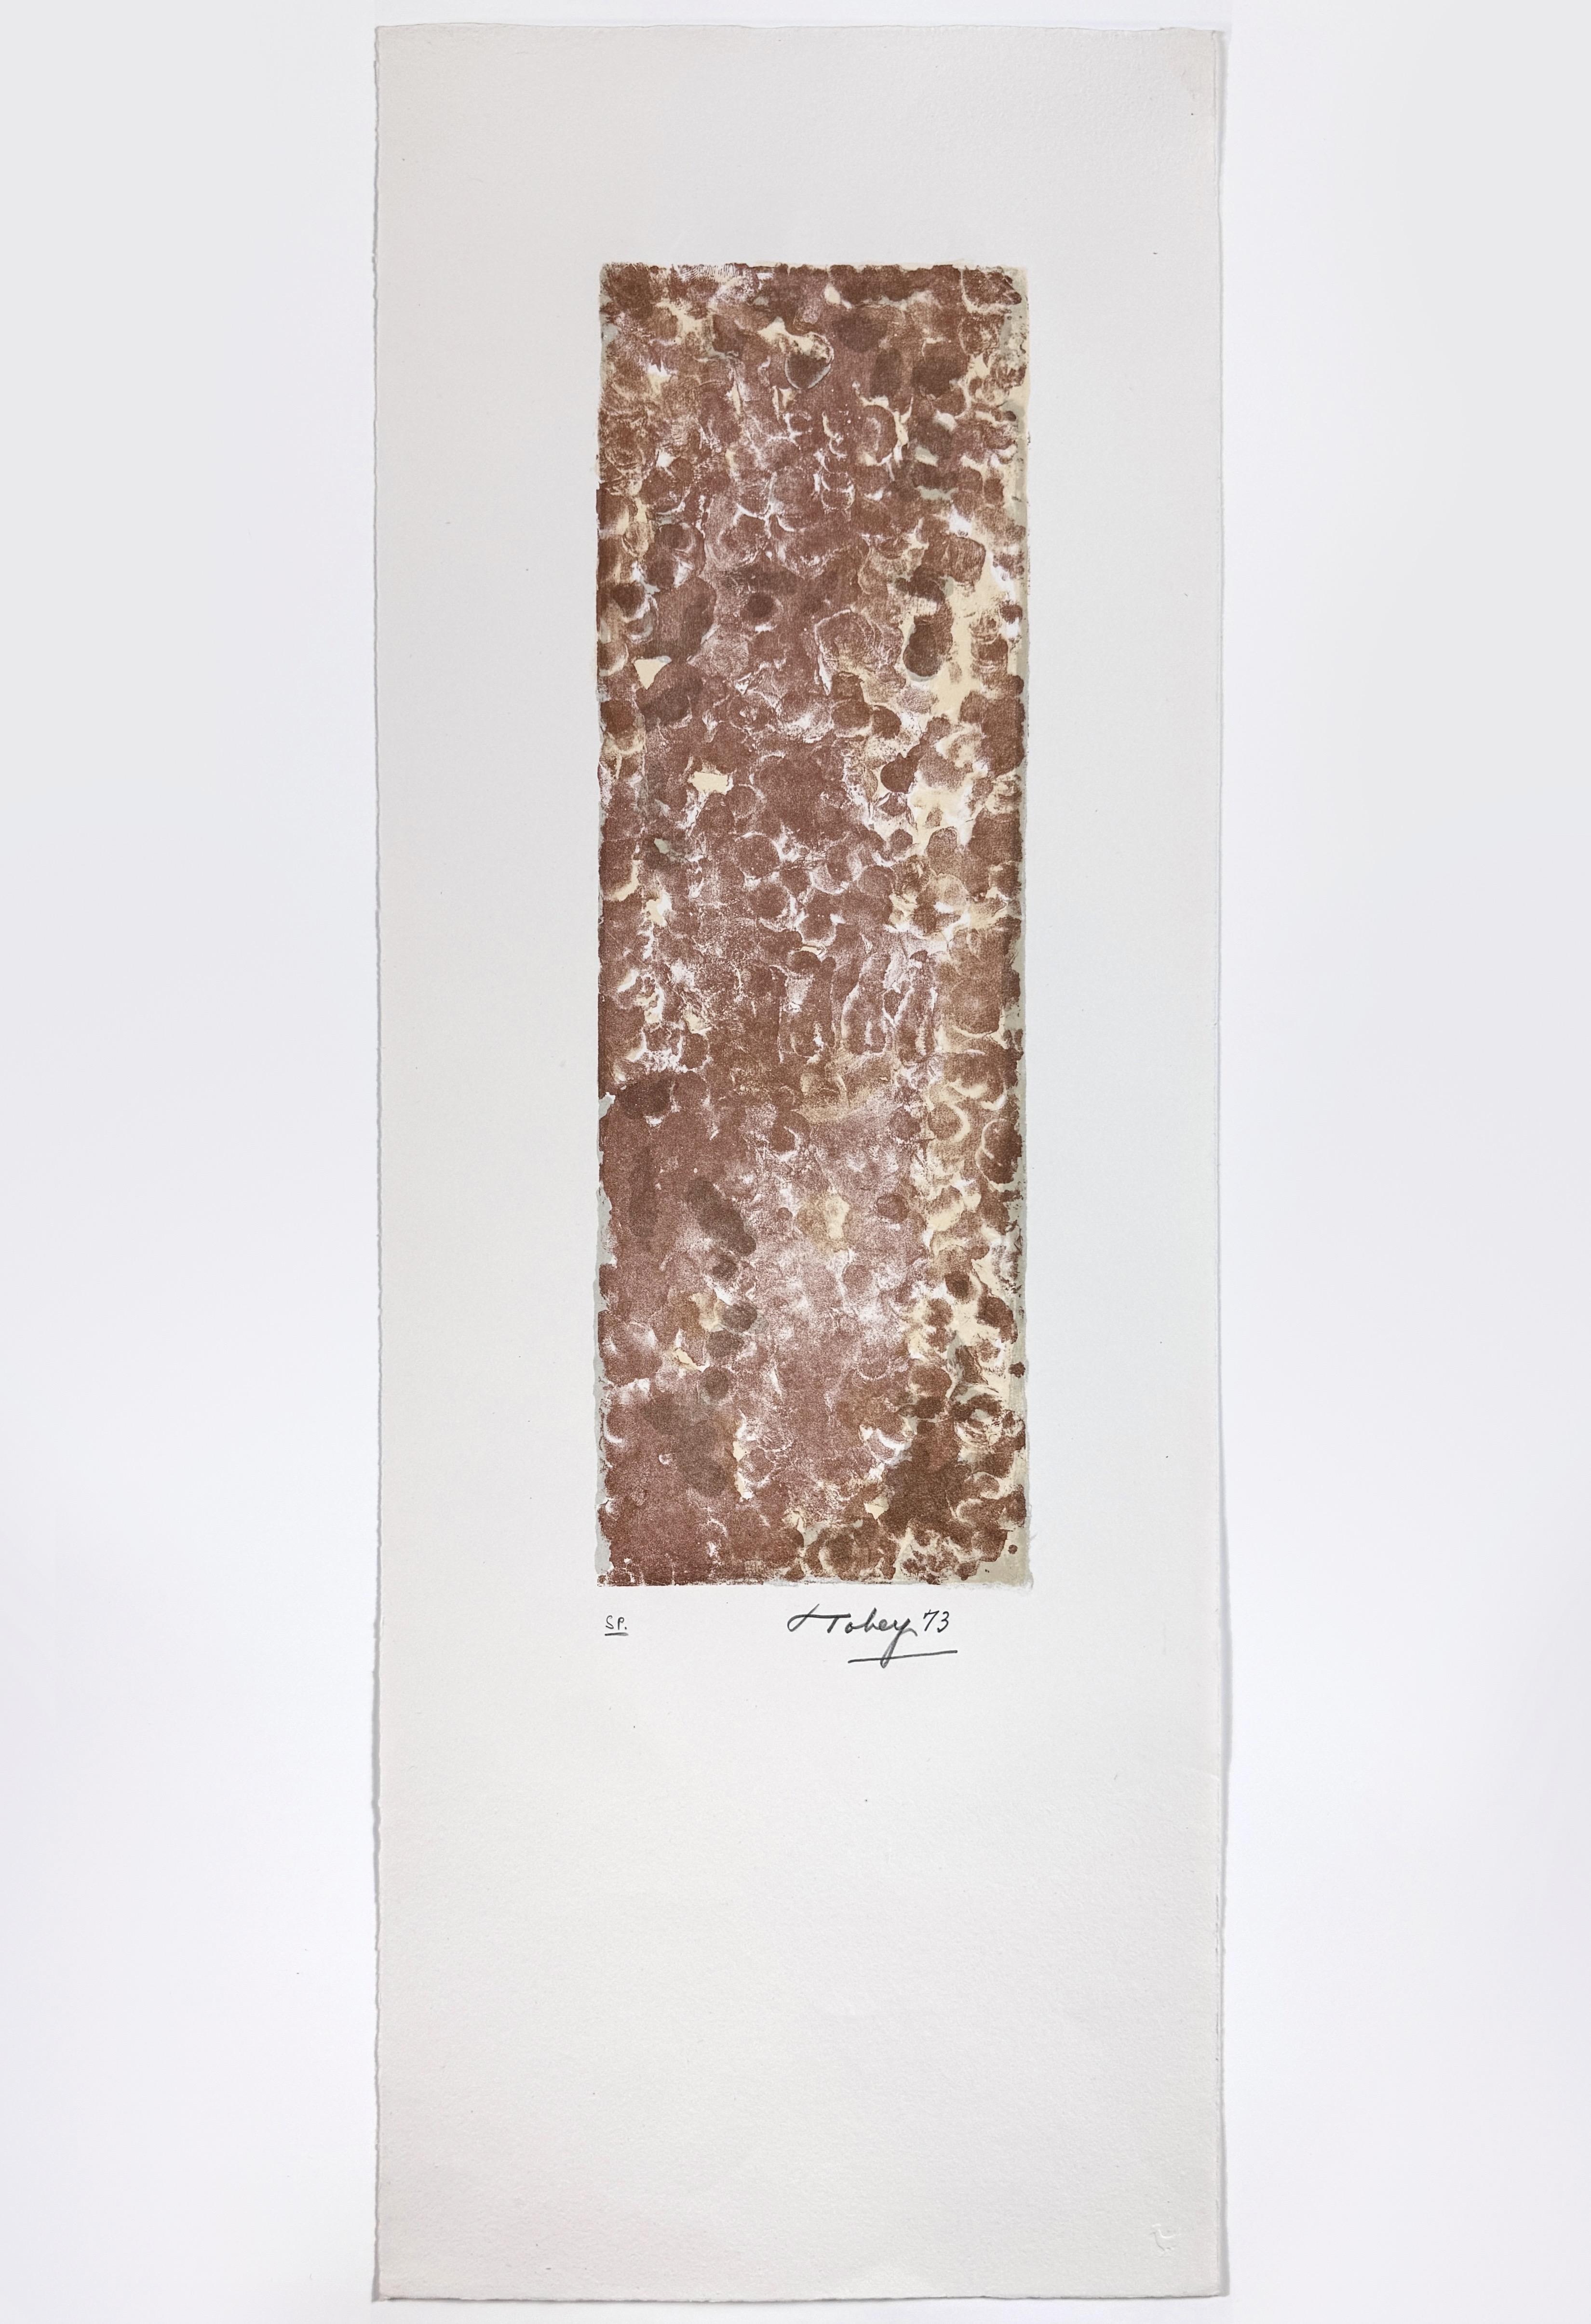 An expressive, moody abstract composition in tan and brown, with Mark Tobey’s soft, calligraphy-inspired mark-making reminiscent of earth, loam, or even flowing water.

Mark Tobey, Fragment 1973
Lithograph
image: 15 3/4 x 5 1/4 inches / 40 x 13.33